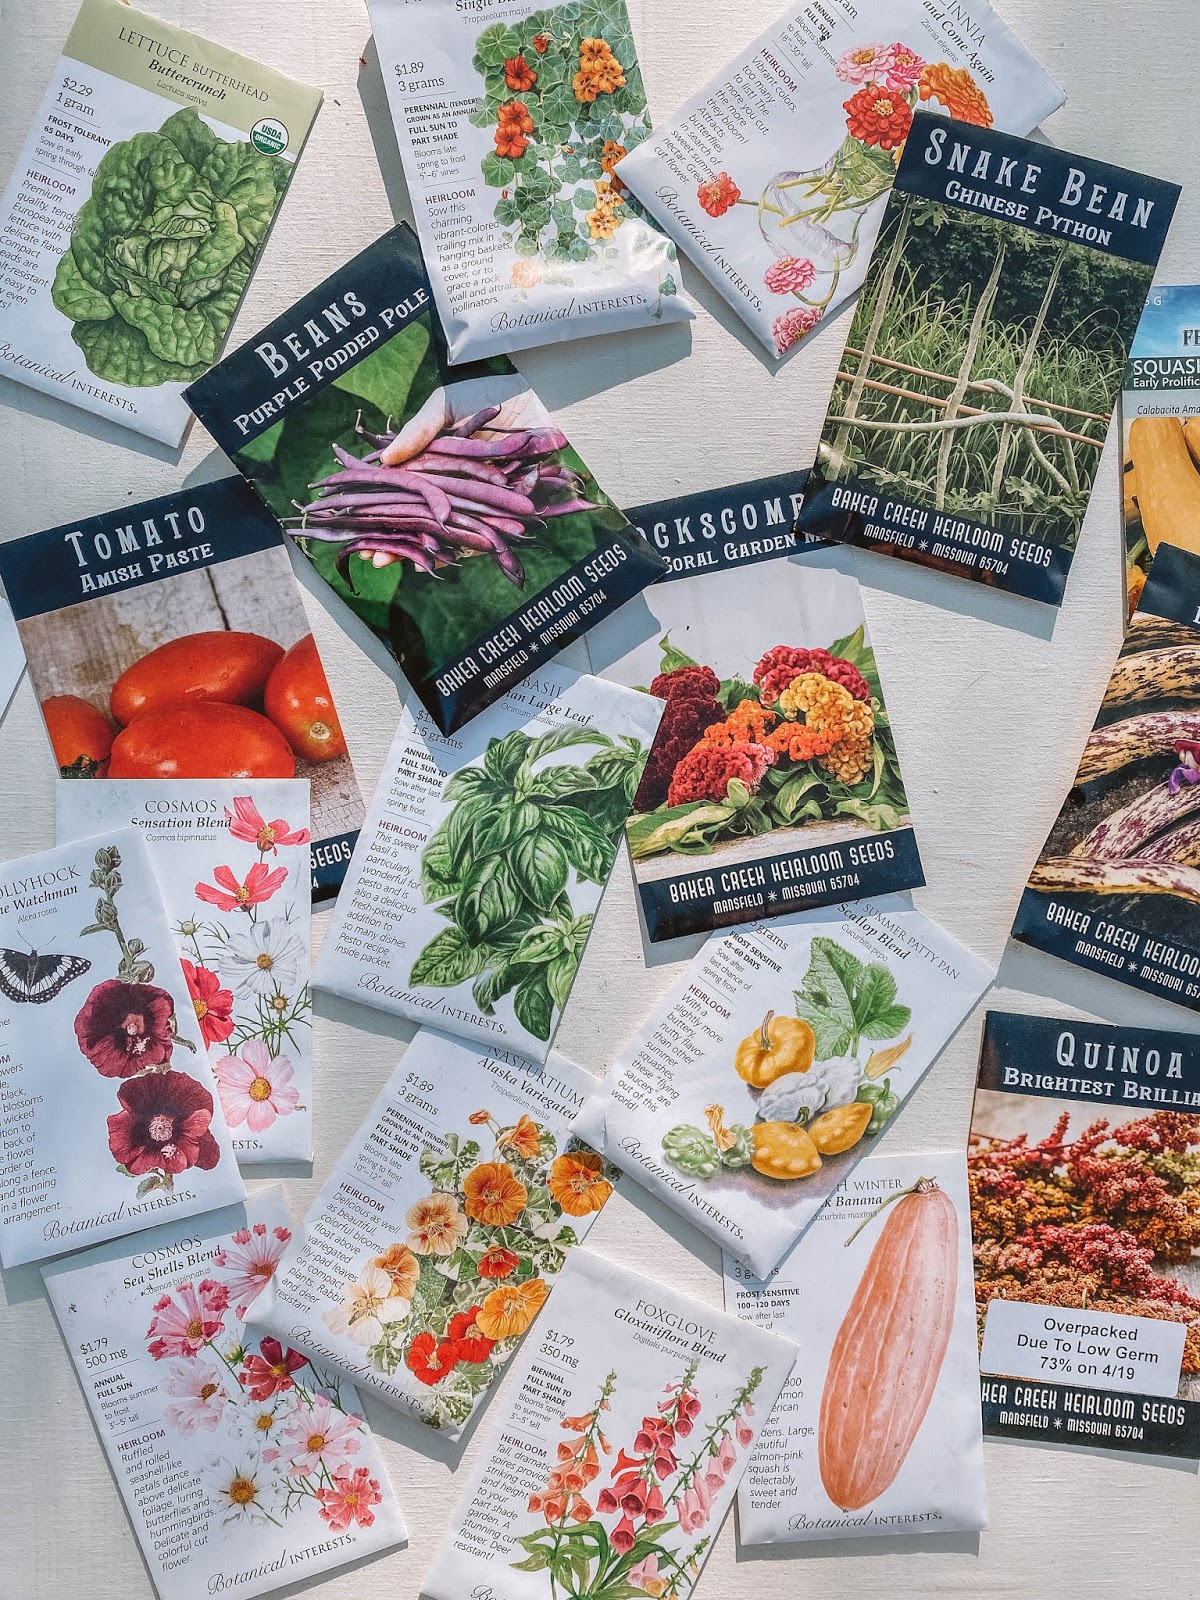 10 Heirloom Seed Companies & Why To Buy Them